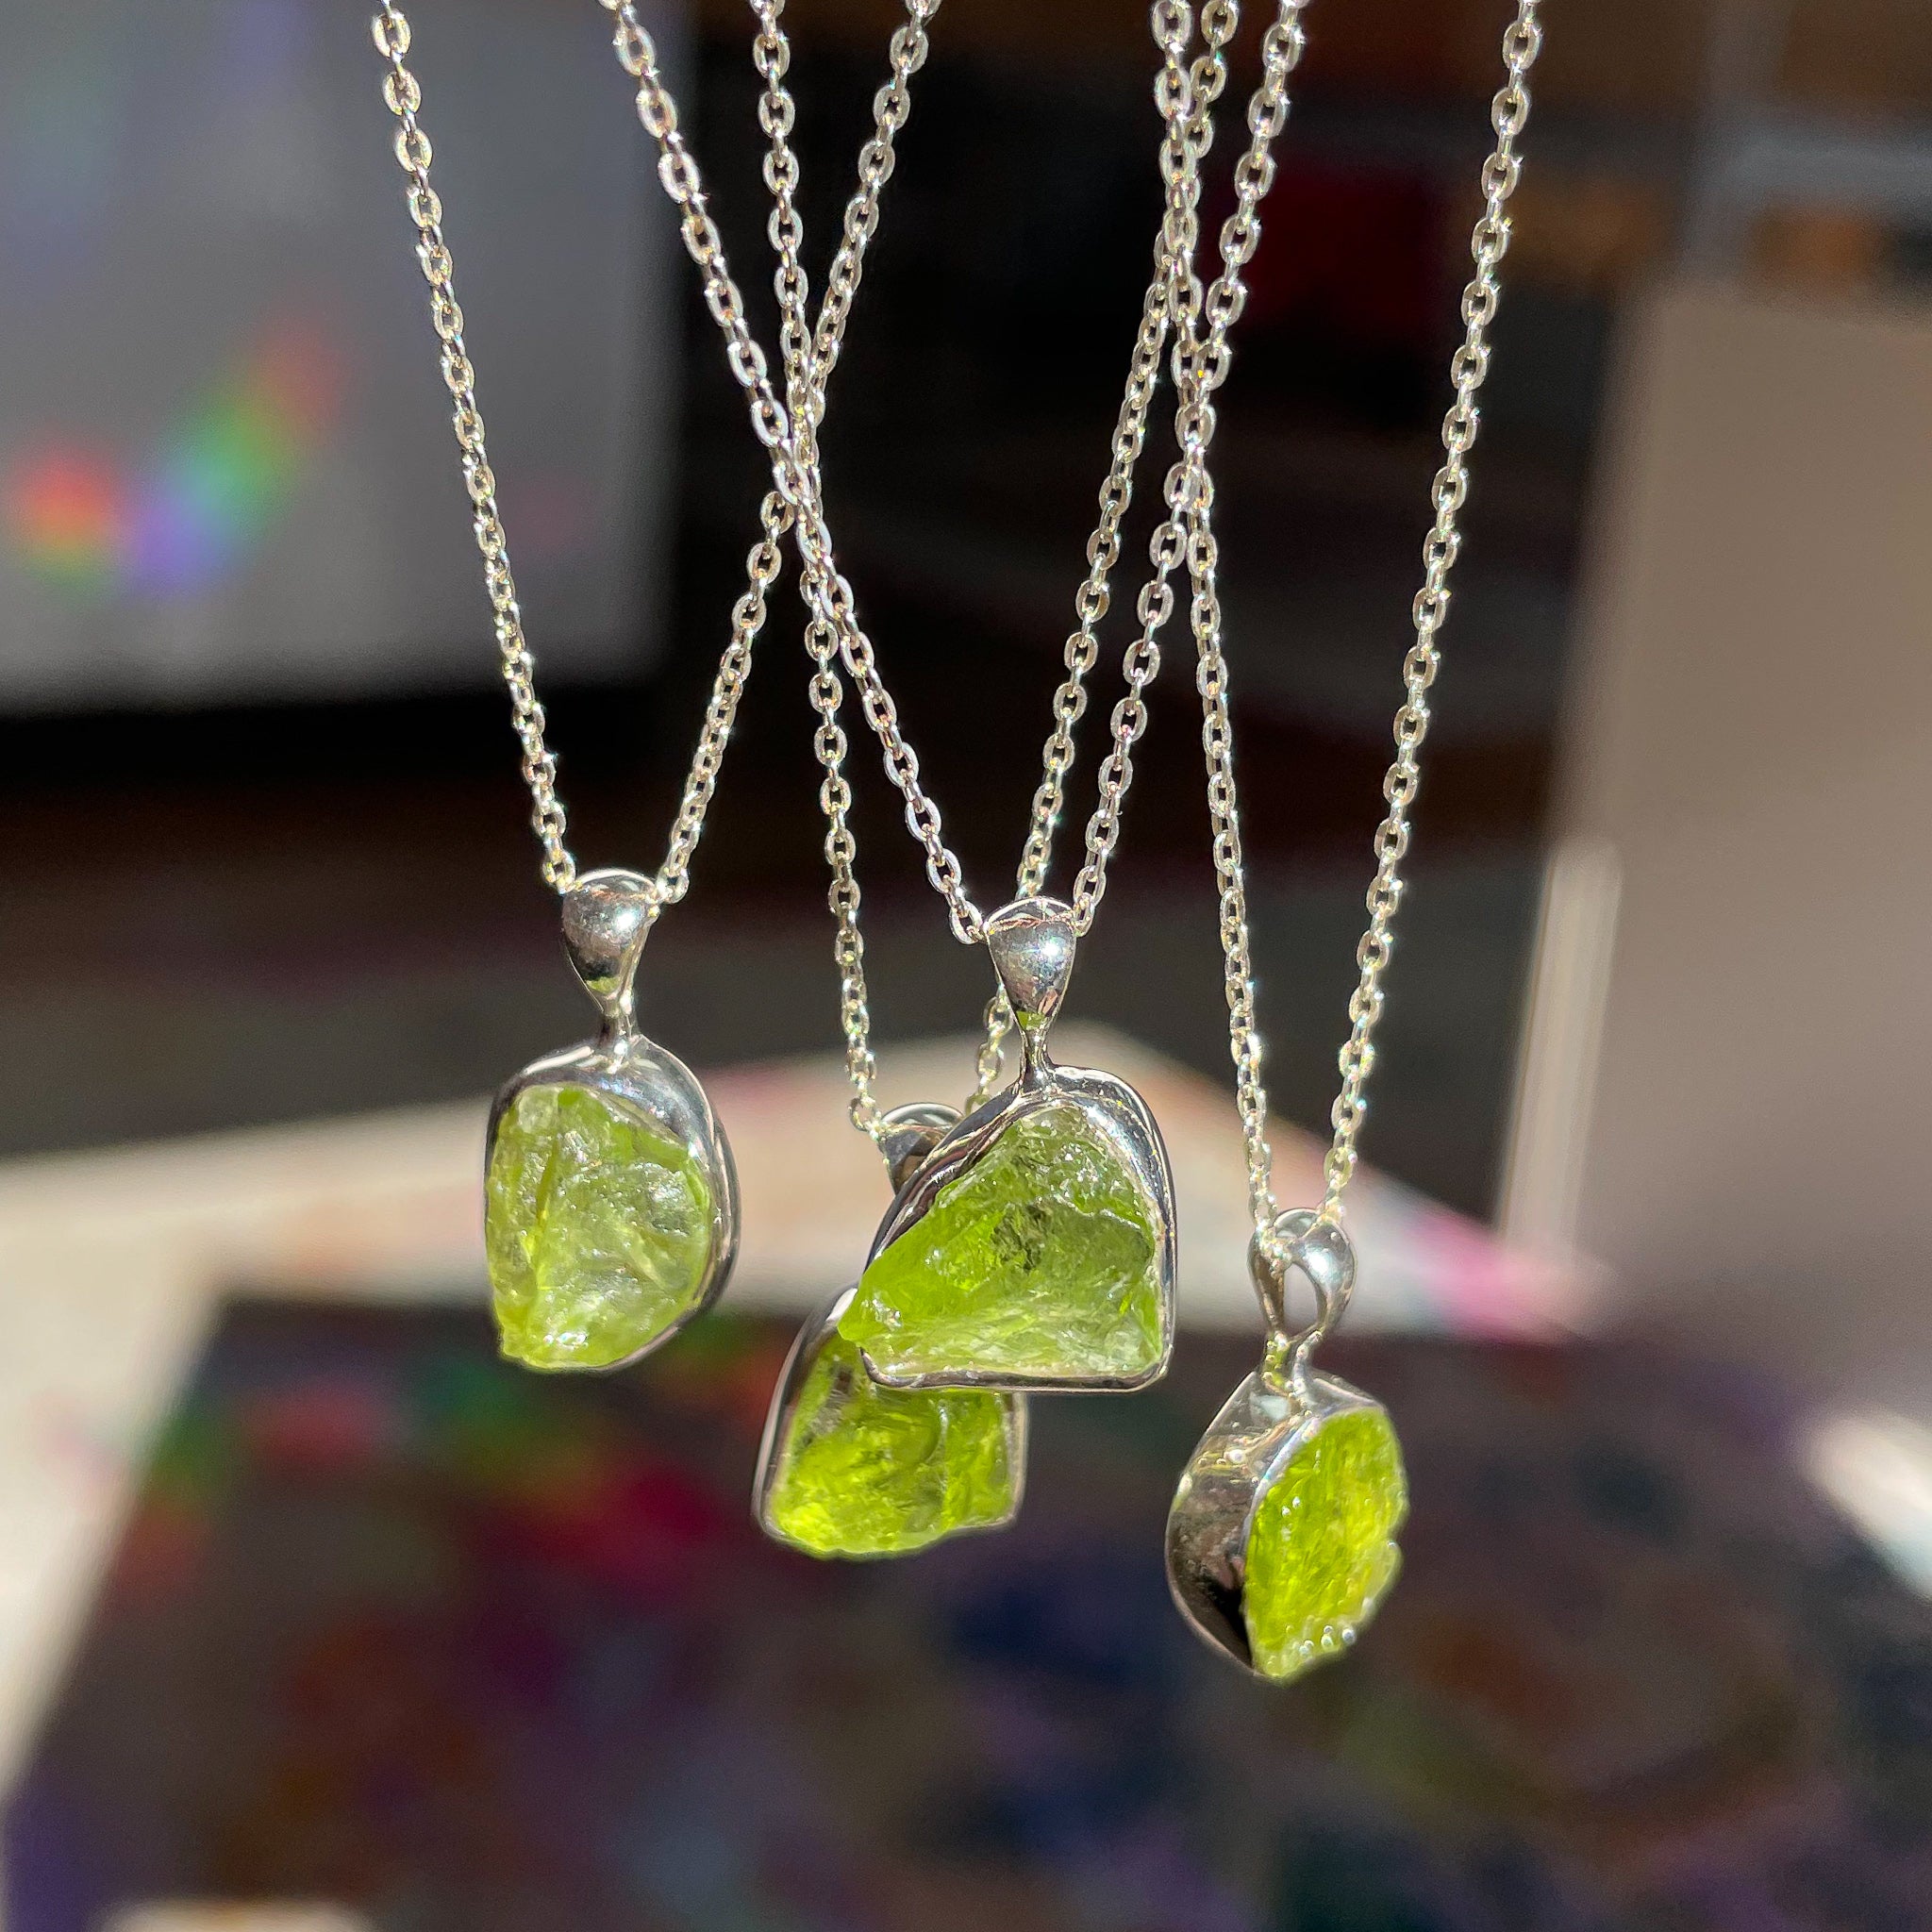 Green Amethyst Quartz and Peridot Necklace 1 – Andrea Jaye Collection